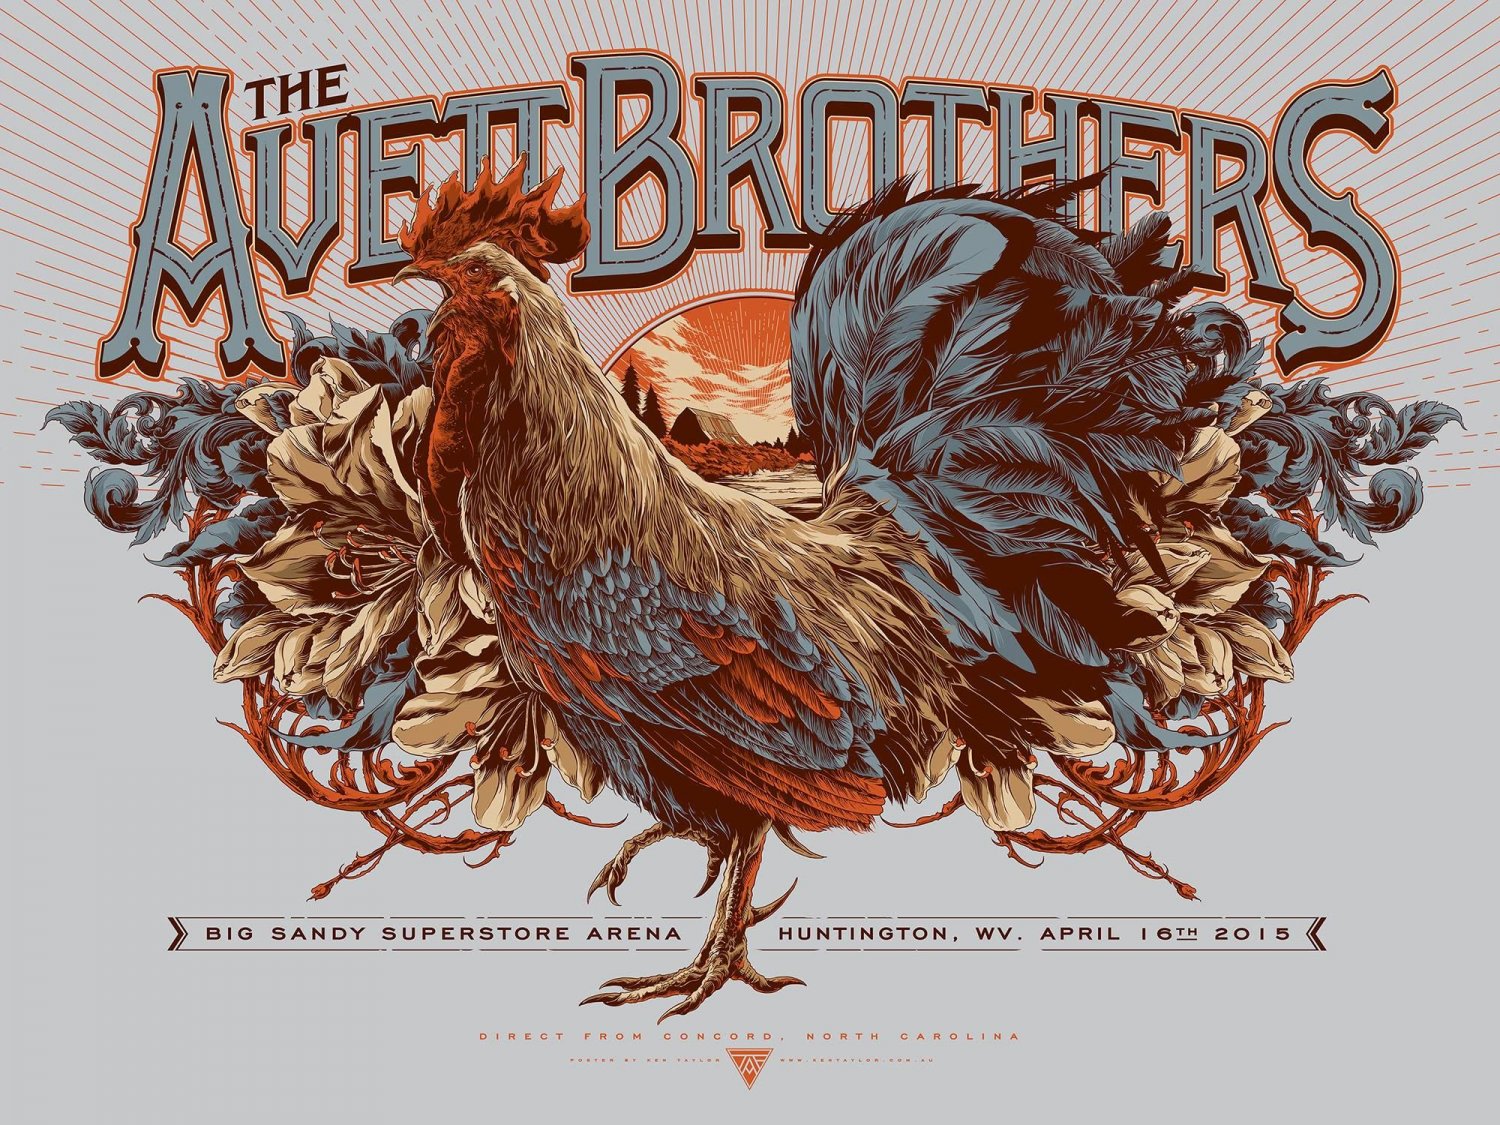 The Avett Brothers Big Sandy Superstore Arena Concert 13"x19" (32cm/49cm) Polyester Fabric Poster